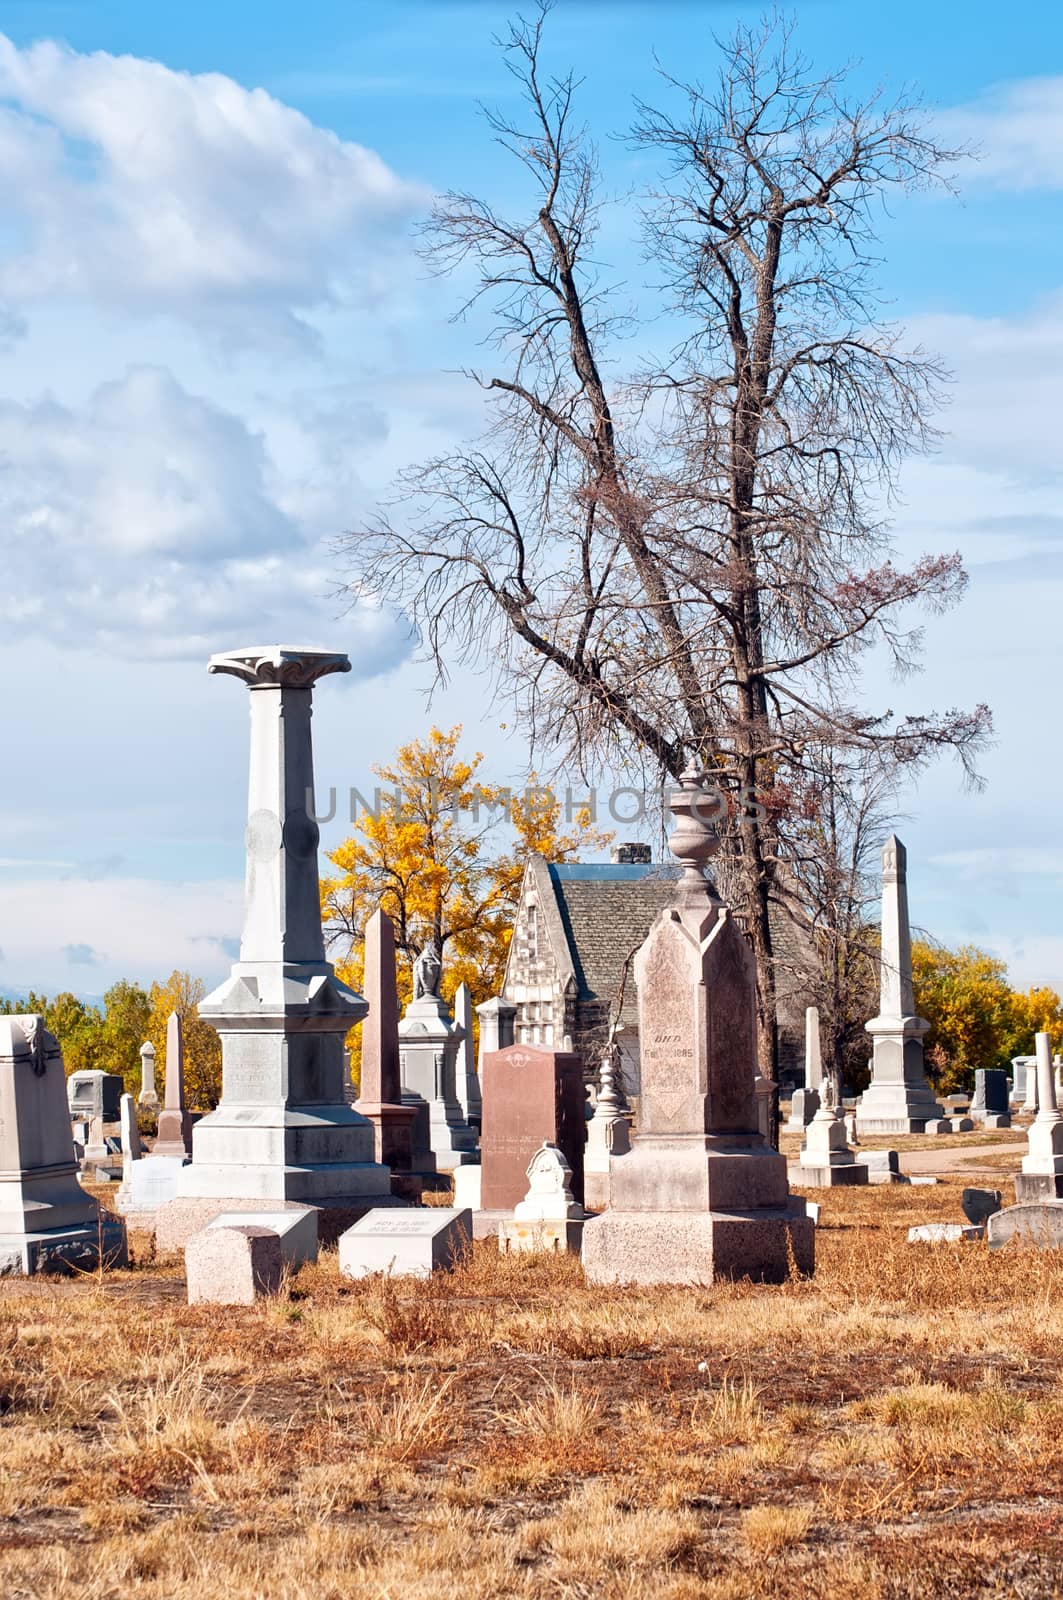 Graveyard with dried grass and dead trees to give a spooky, scary Halloween feel to it.